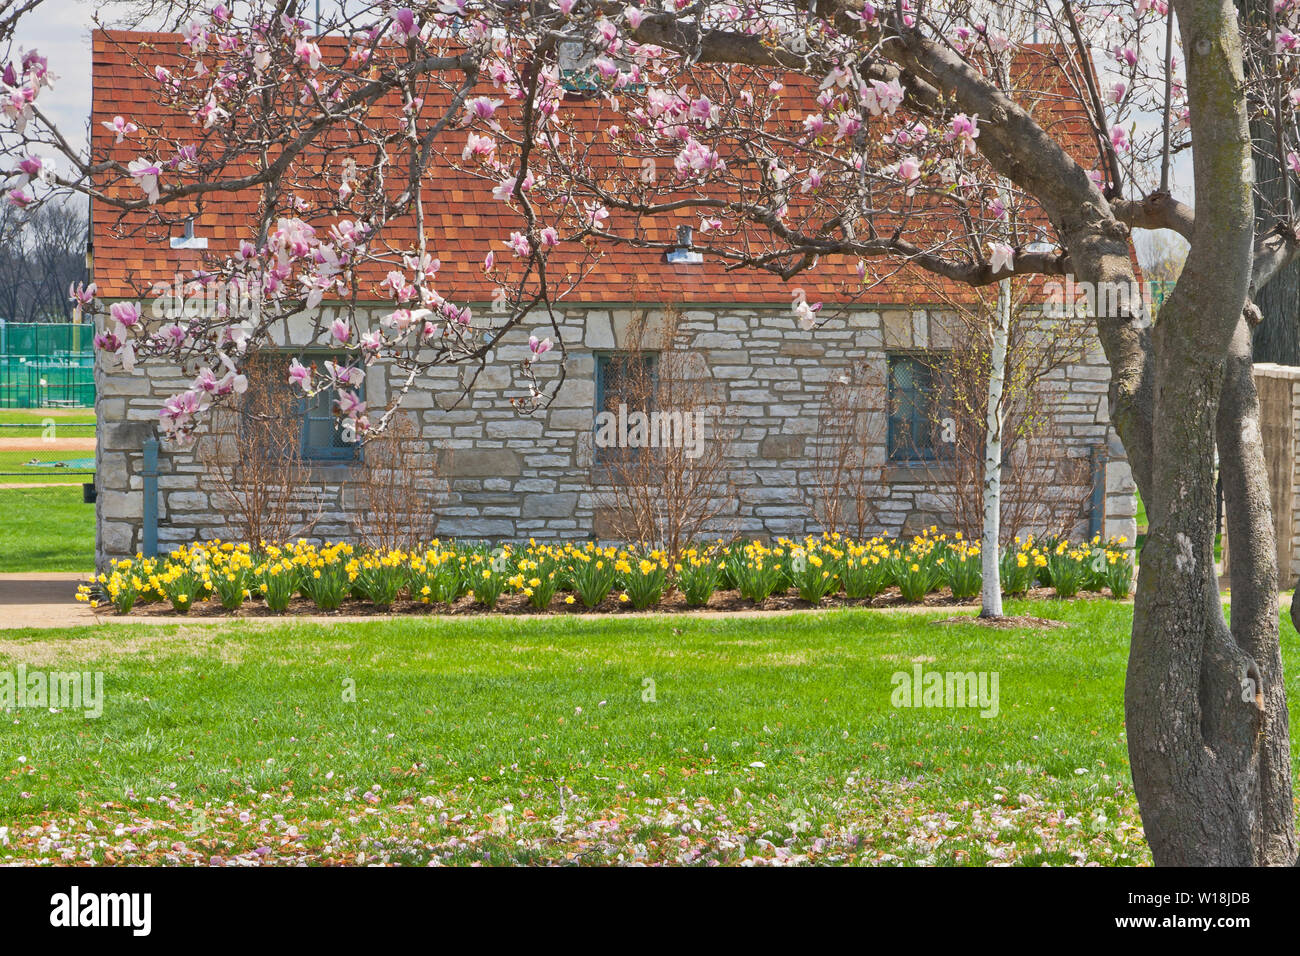 The pink blossoms of a saucer magnolia tree and a row of yellow daffodils frame a rustic-style stone building at St. Louis Forest Park on a spring day Stock Photo